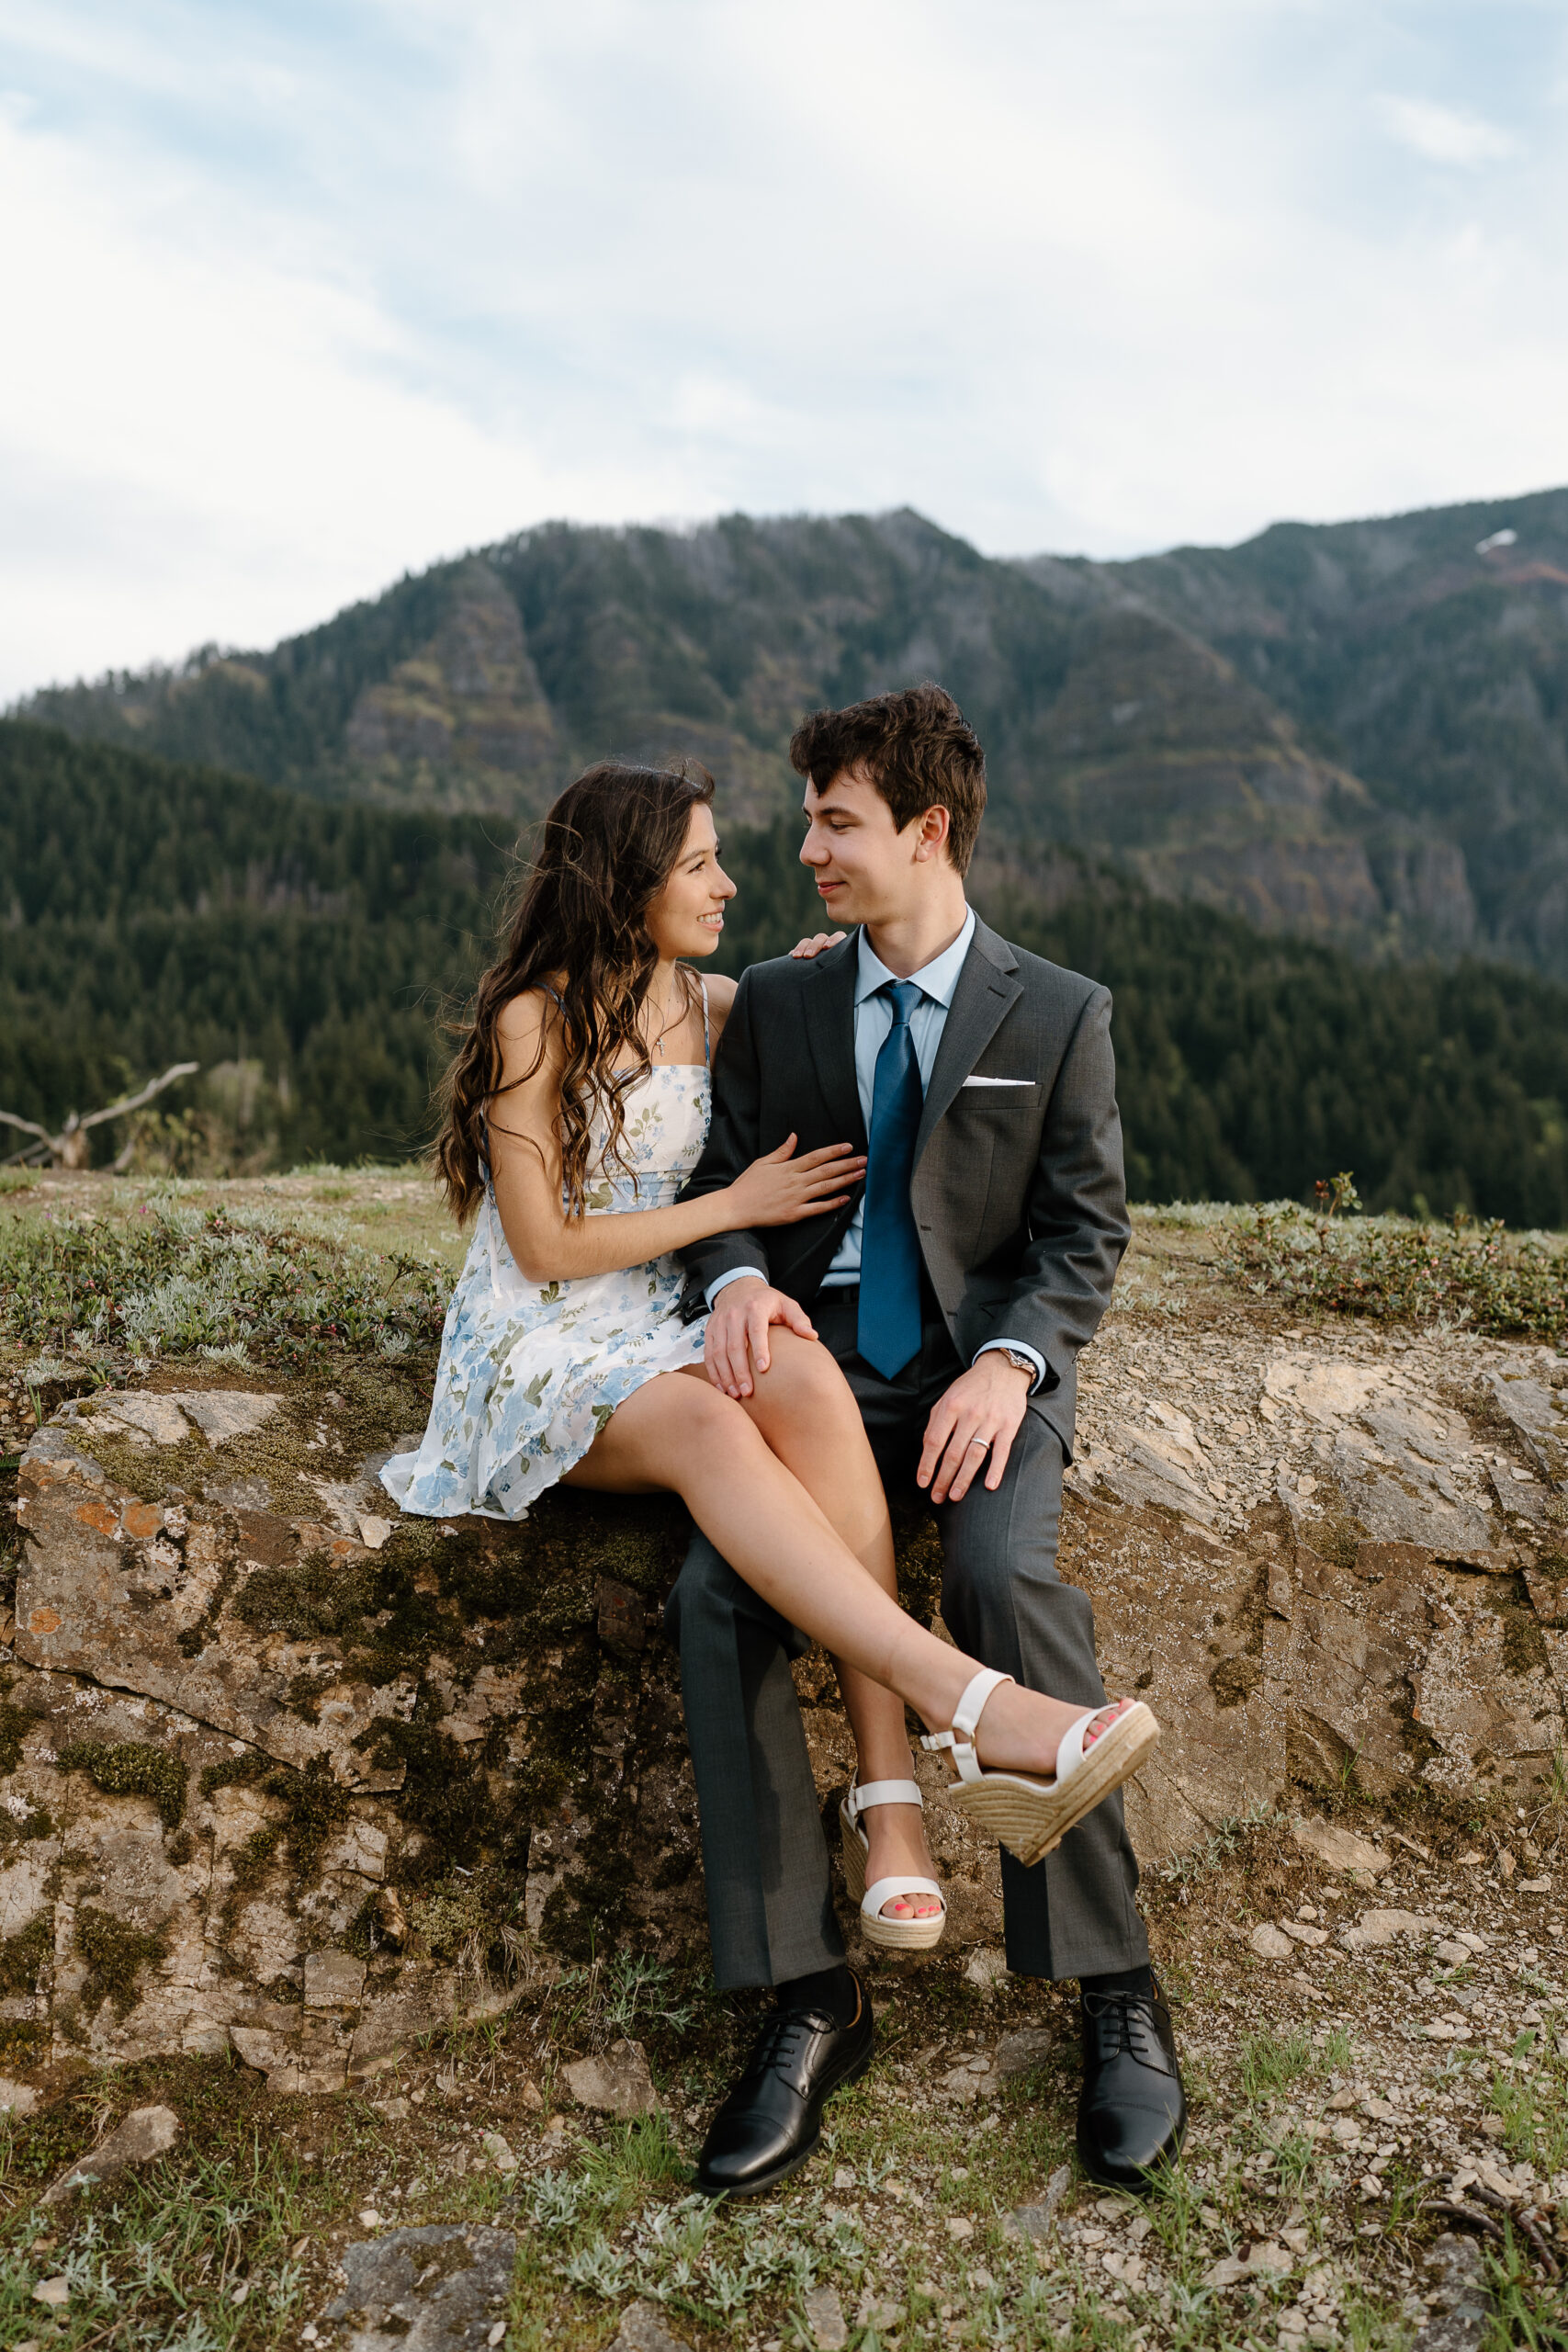 Engagement session location ideas in Oregon.